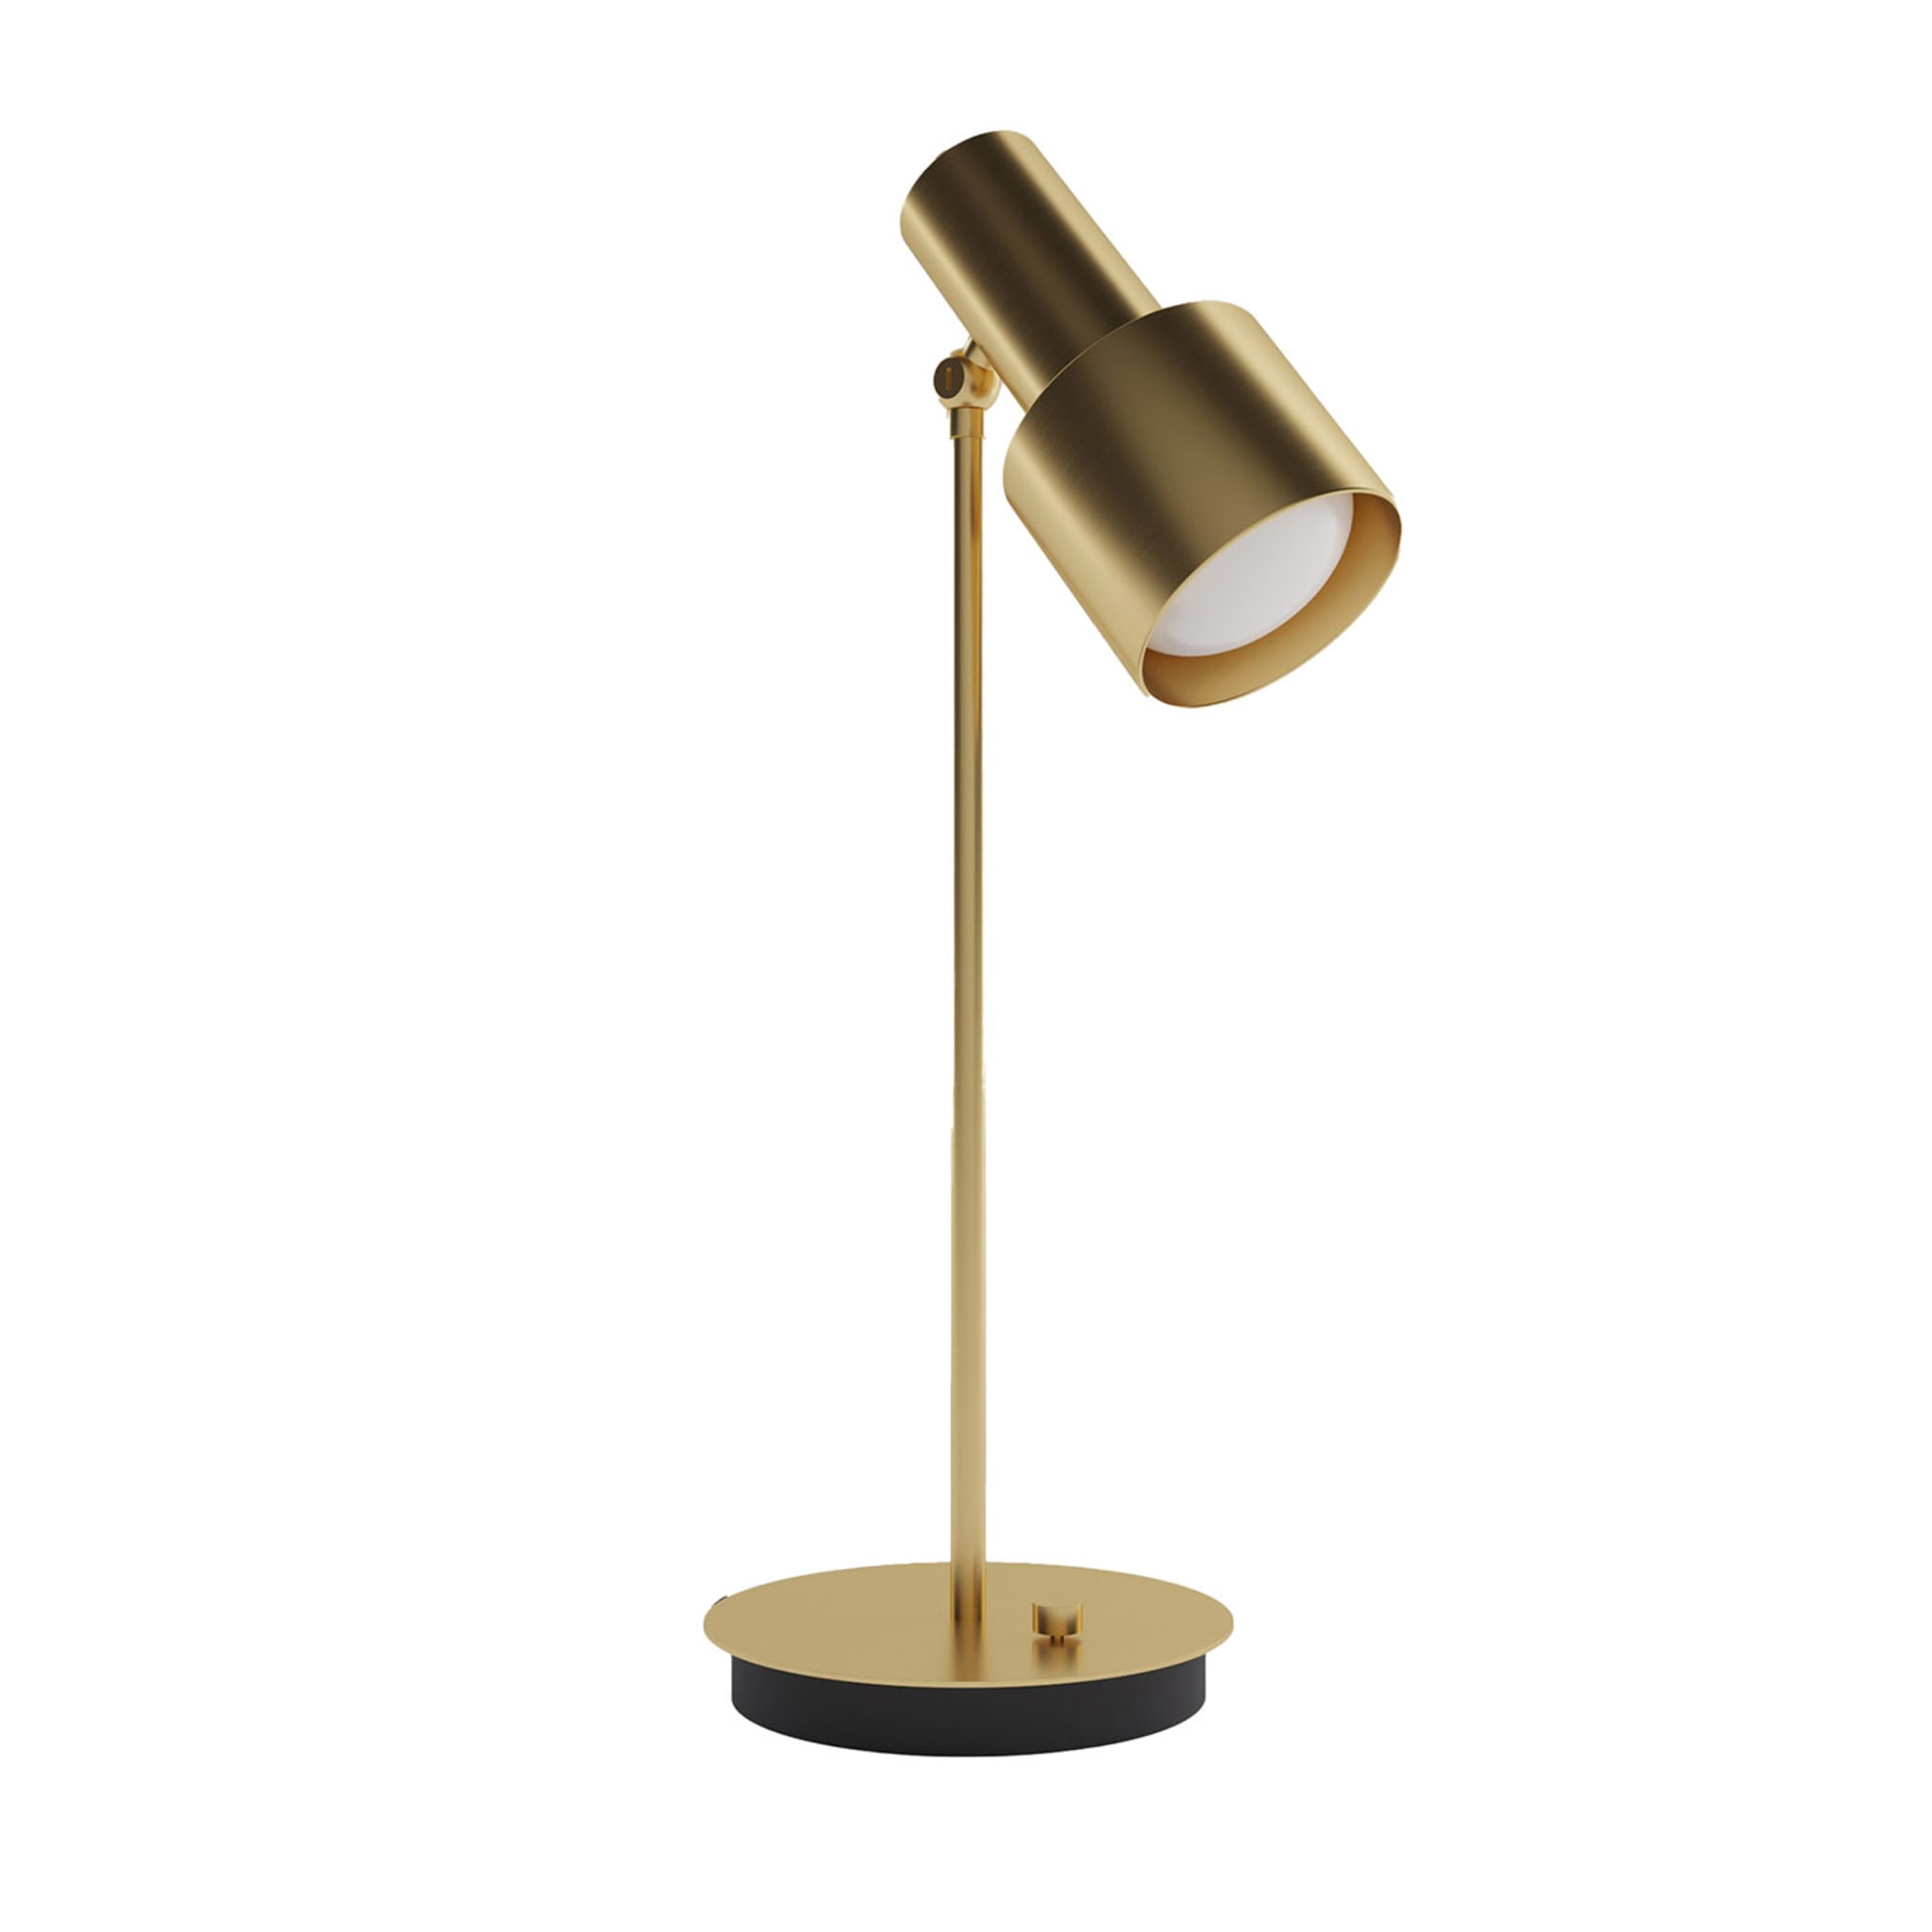 Light Gallery Luxury GP Bronzed Table Lamp by Marco Police - Main view